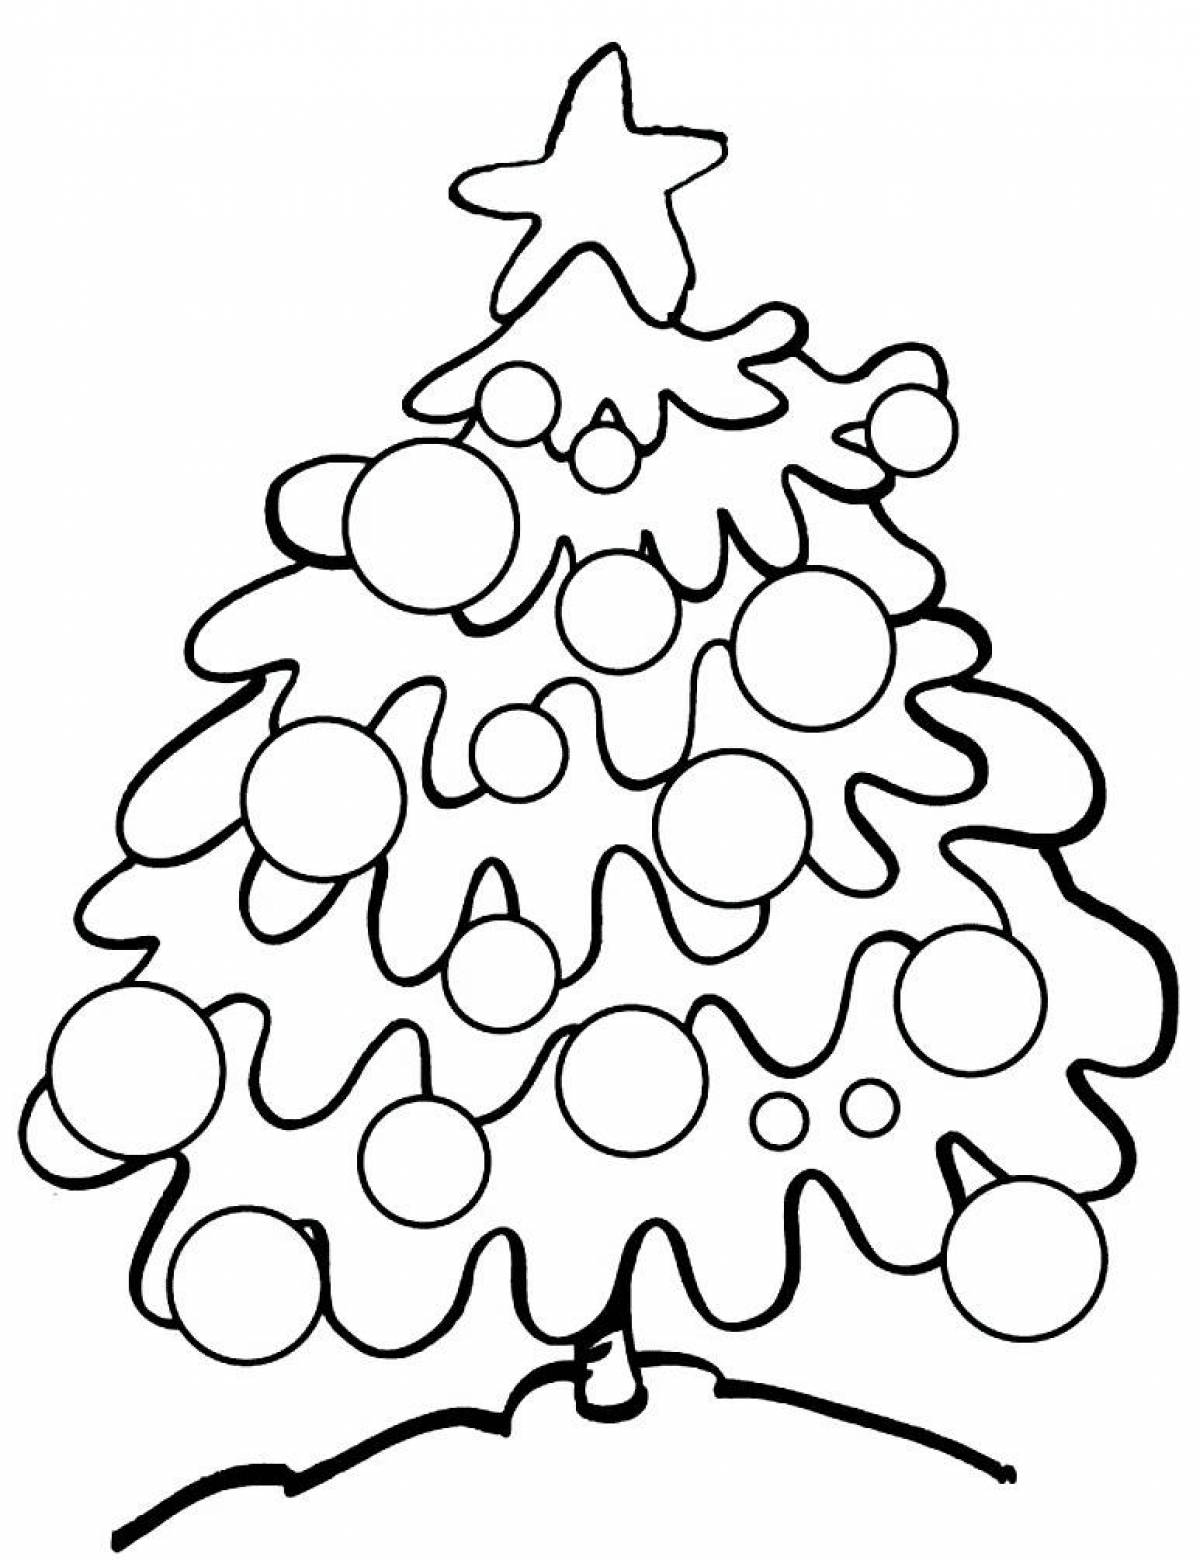 Christmas tree playful coloring book for preschoolers 2-3 years old